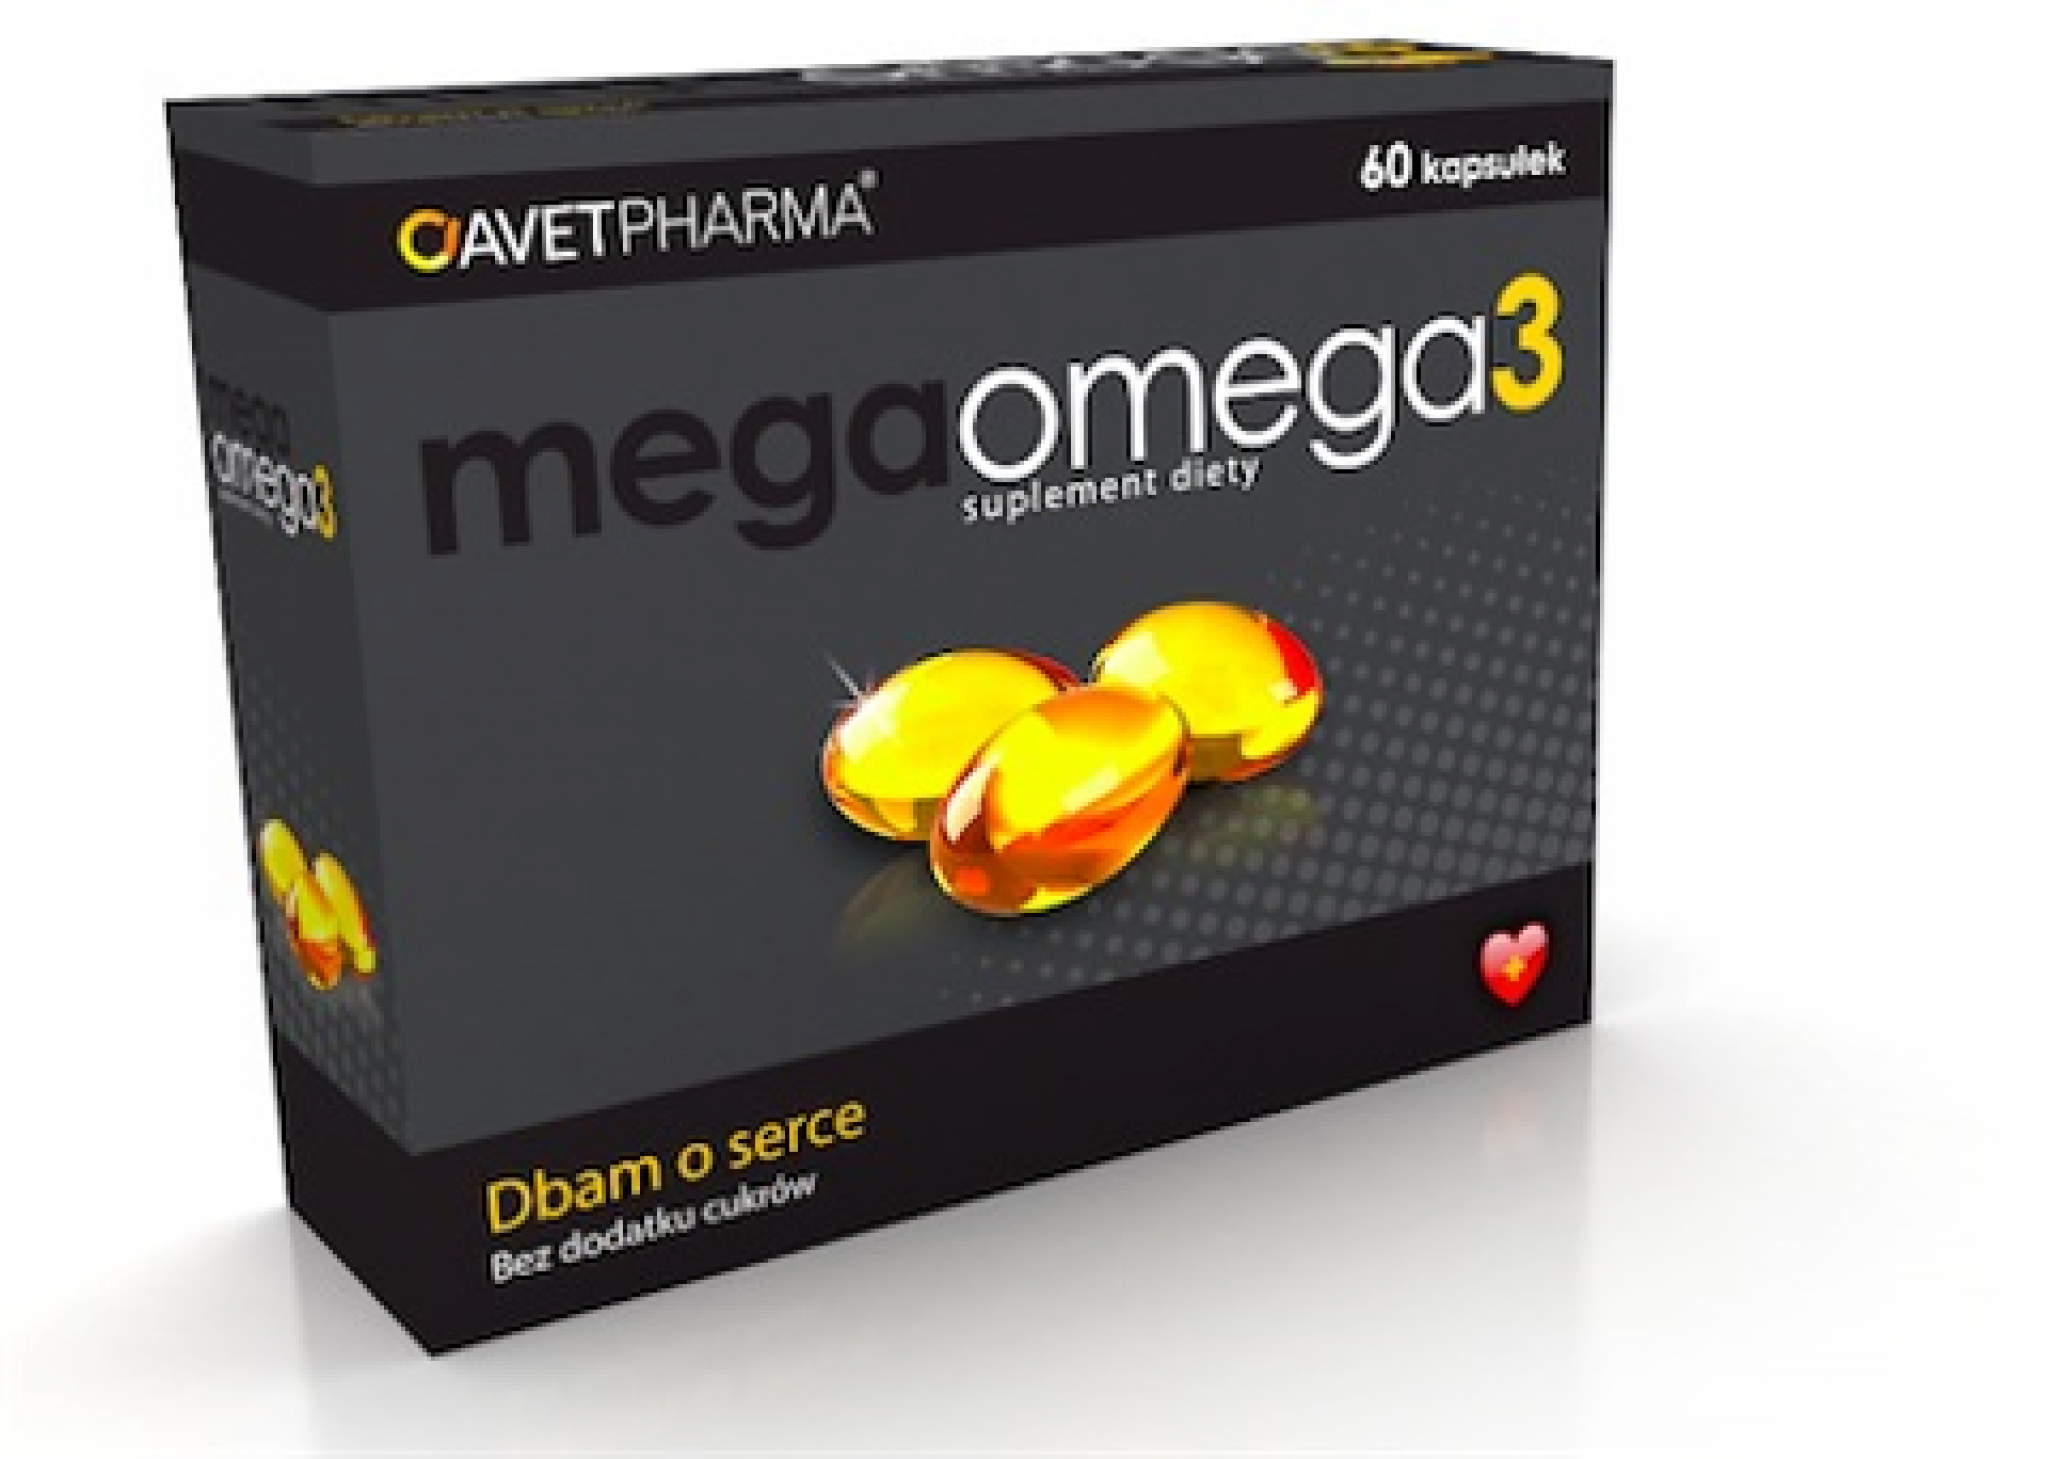 Snt omega 3 капсулы. Омега 3 60 капсул. Restartbio Омега-3 60% капсулы. Мега Омега. Мега Омега 912.